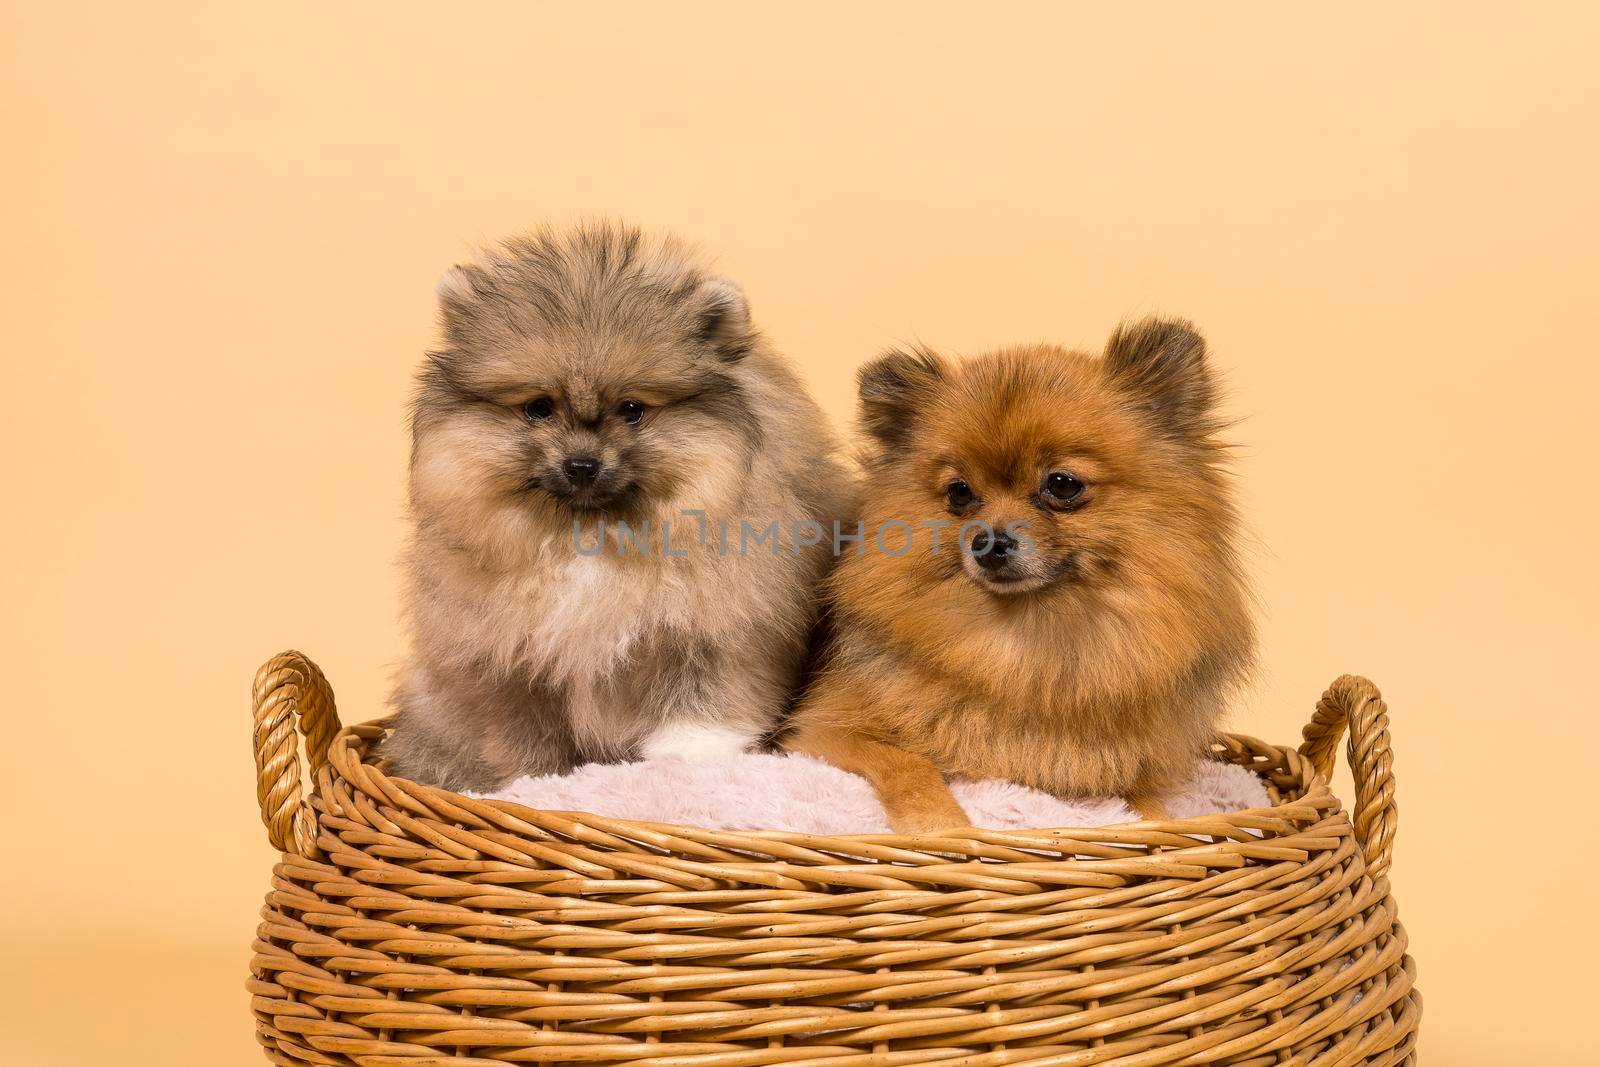 Two small Pomeranian puppies sitting in a basket with a beige background by LeoniekvanderVliet